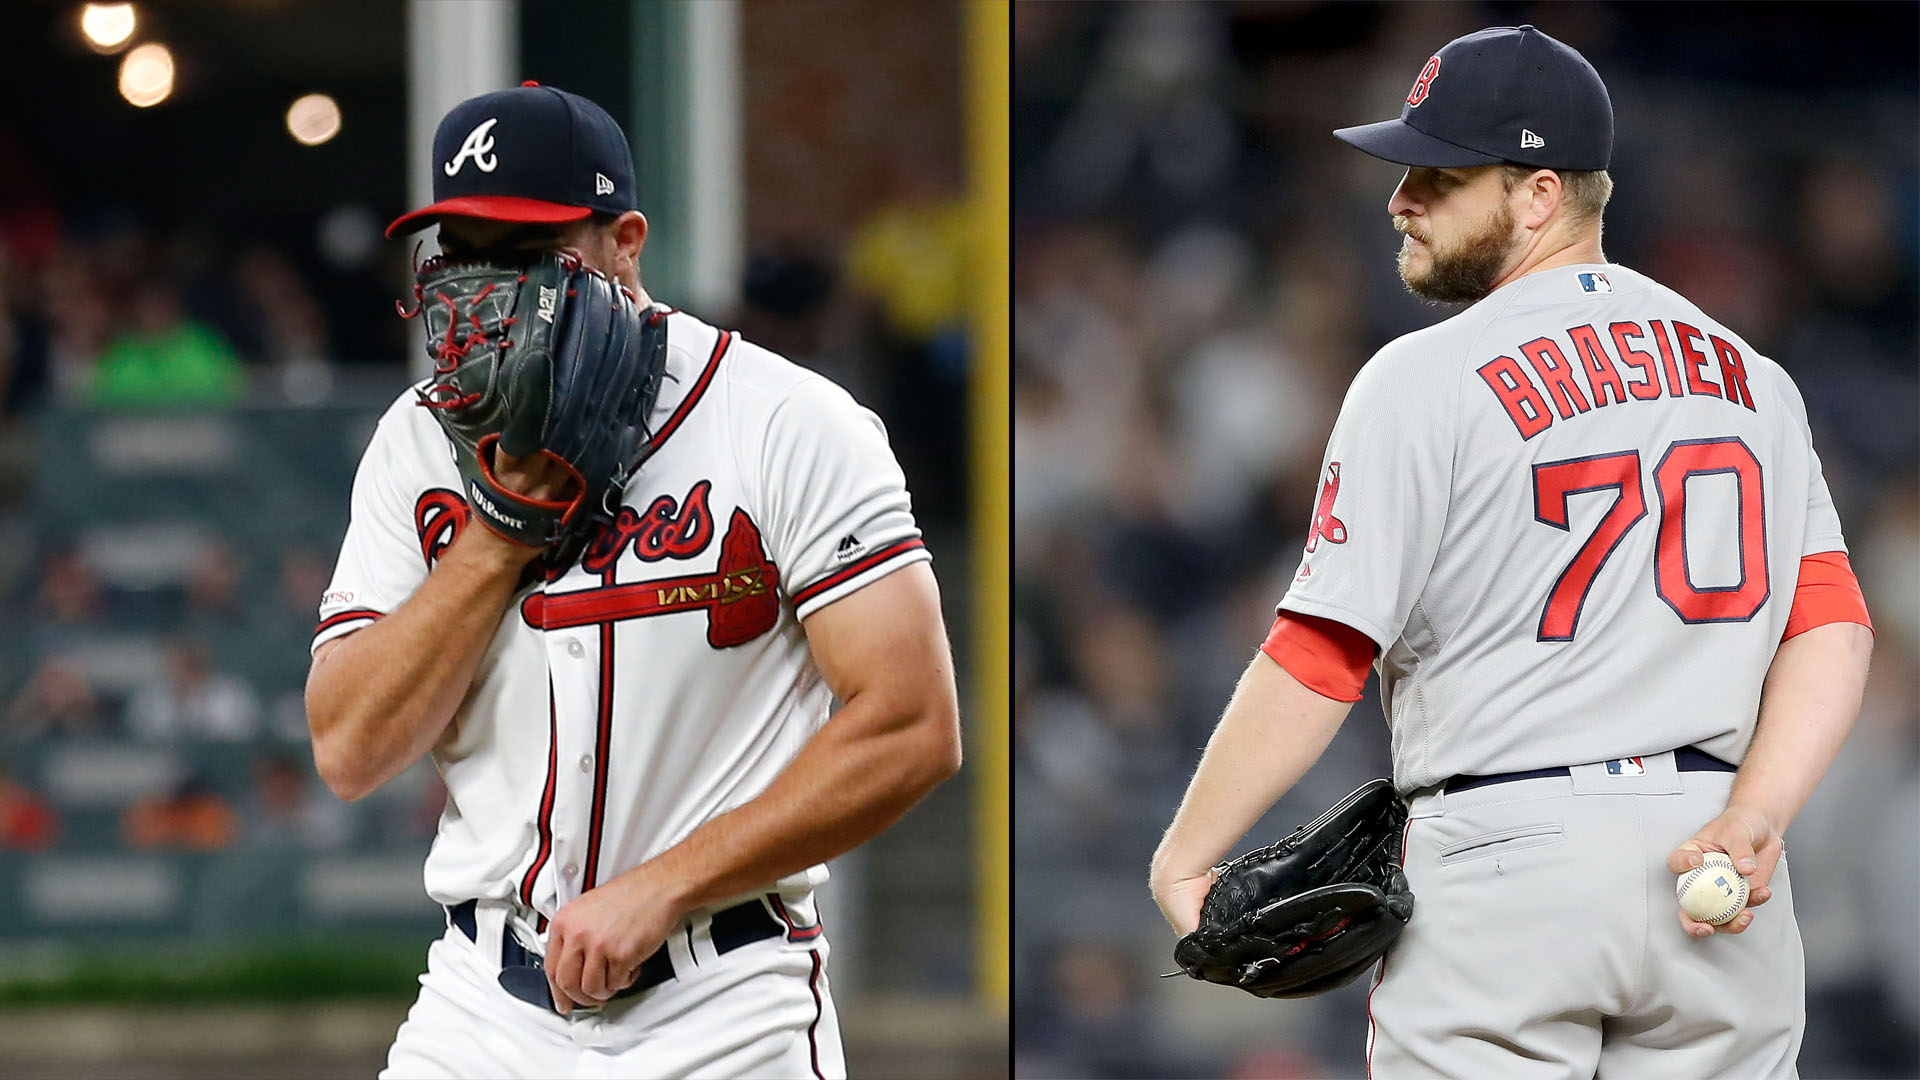 The Braves' bullpen lost their second game in a row, while the Red Sox's relievers gave up four runs.